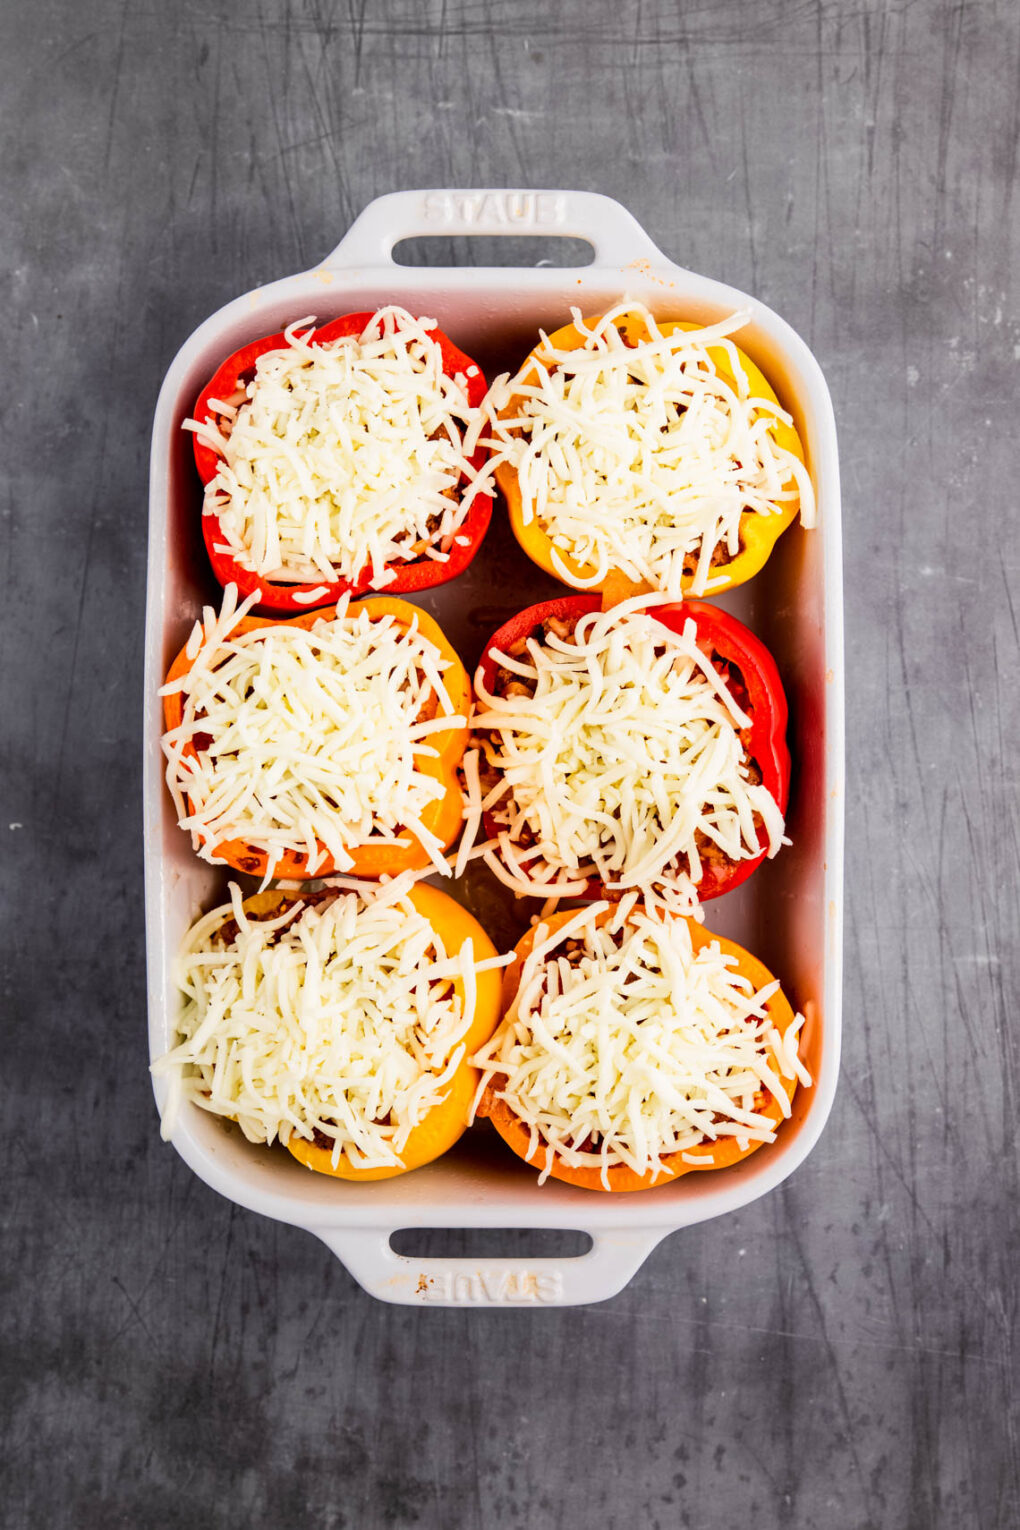 Venison bell peppers topped with white cheese